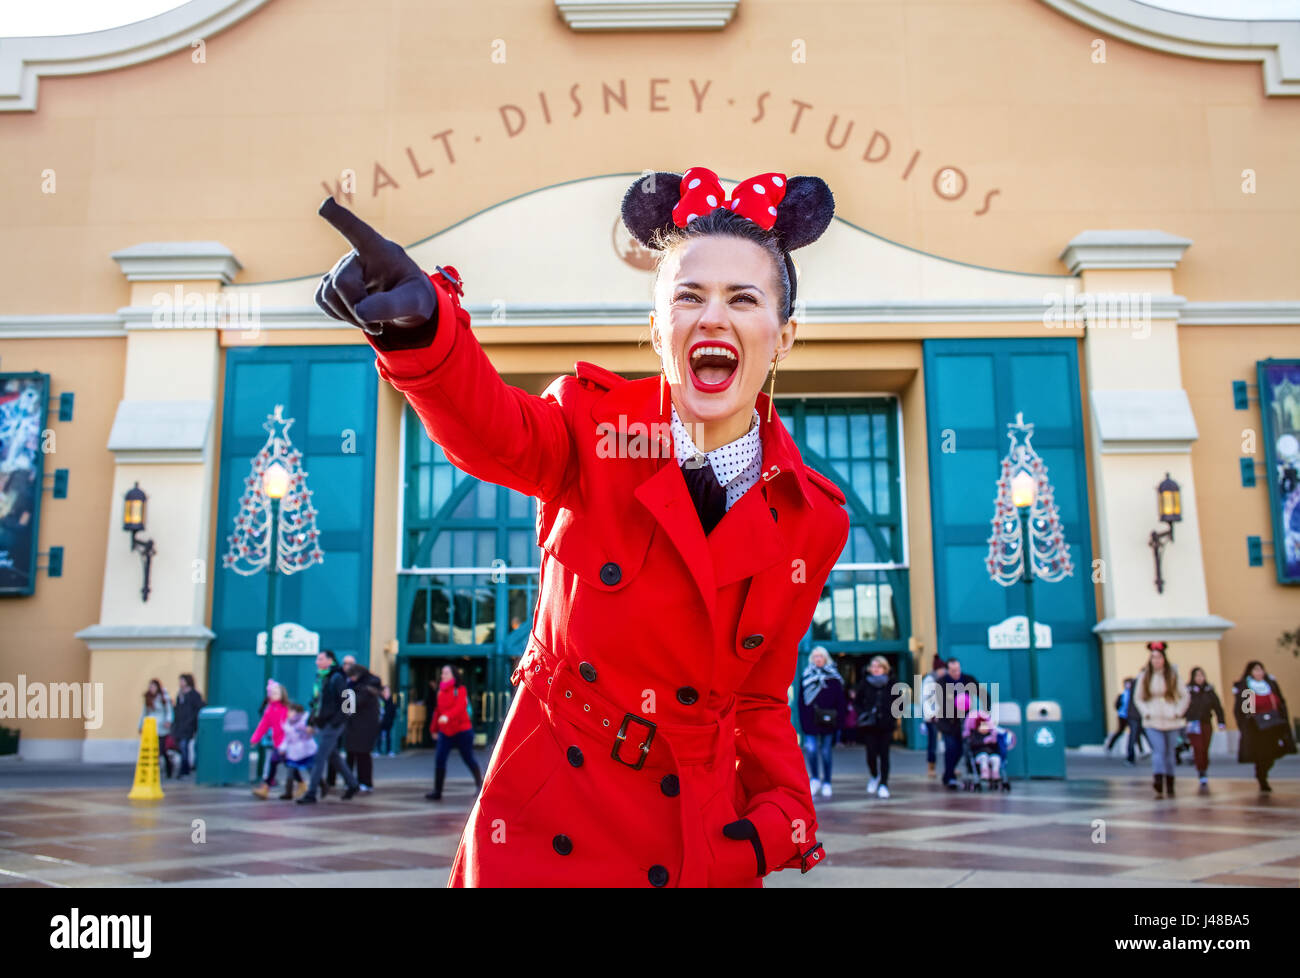 DISNEYLAND, FRANCE - DECEMBER, 8, 2016:. happy modern woman in red trench coat in the front of Disney Studio 1 pointing at something Stock Photo